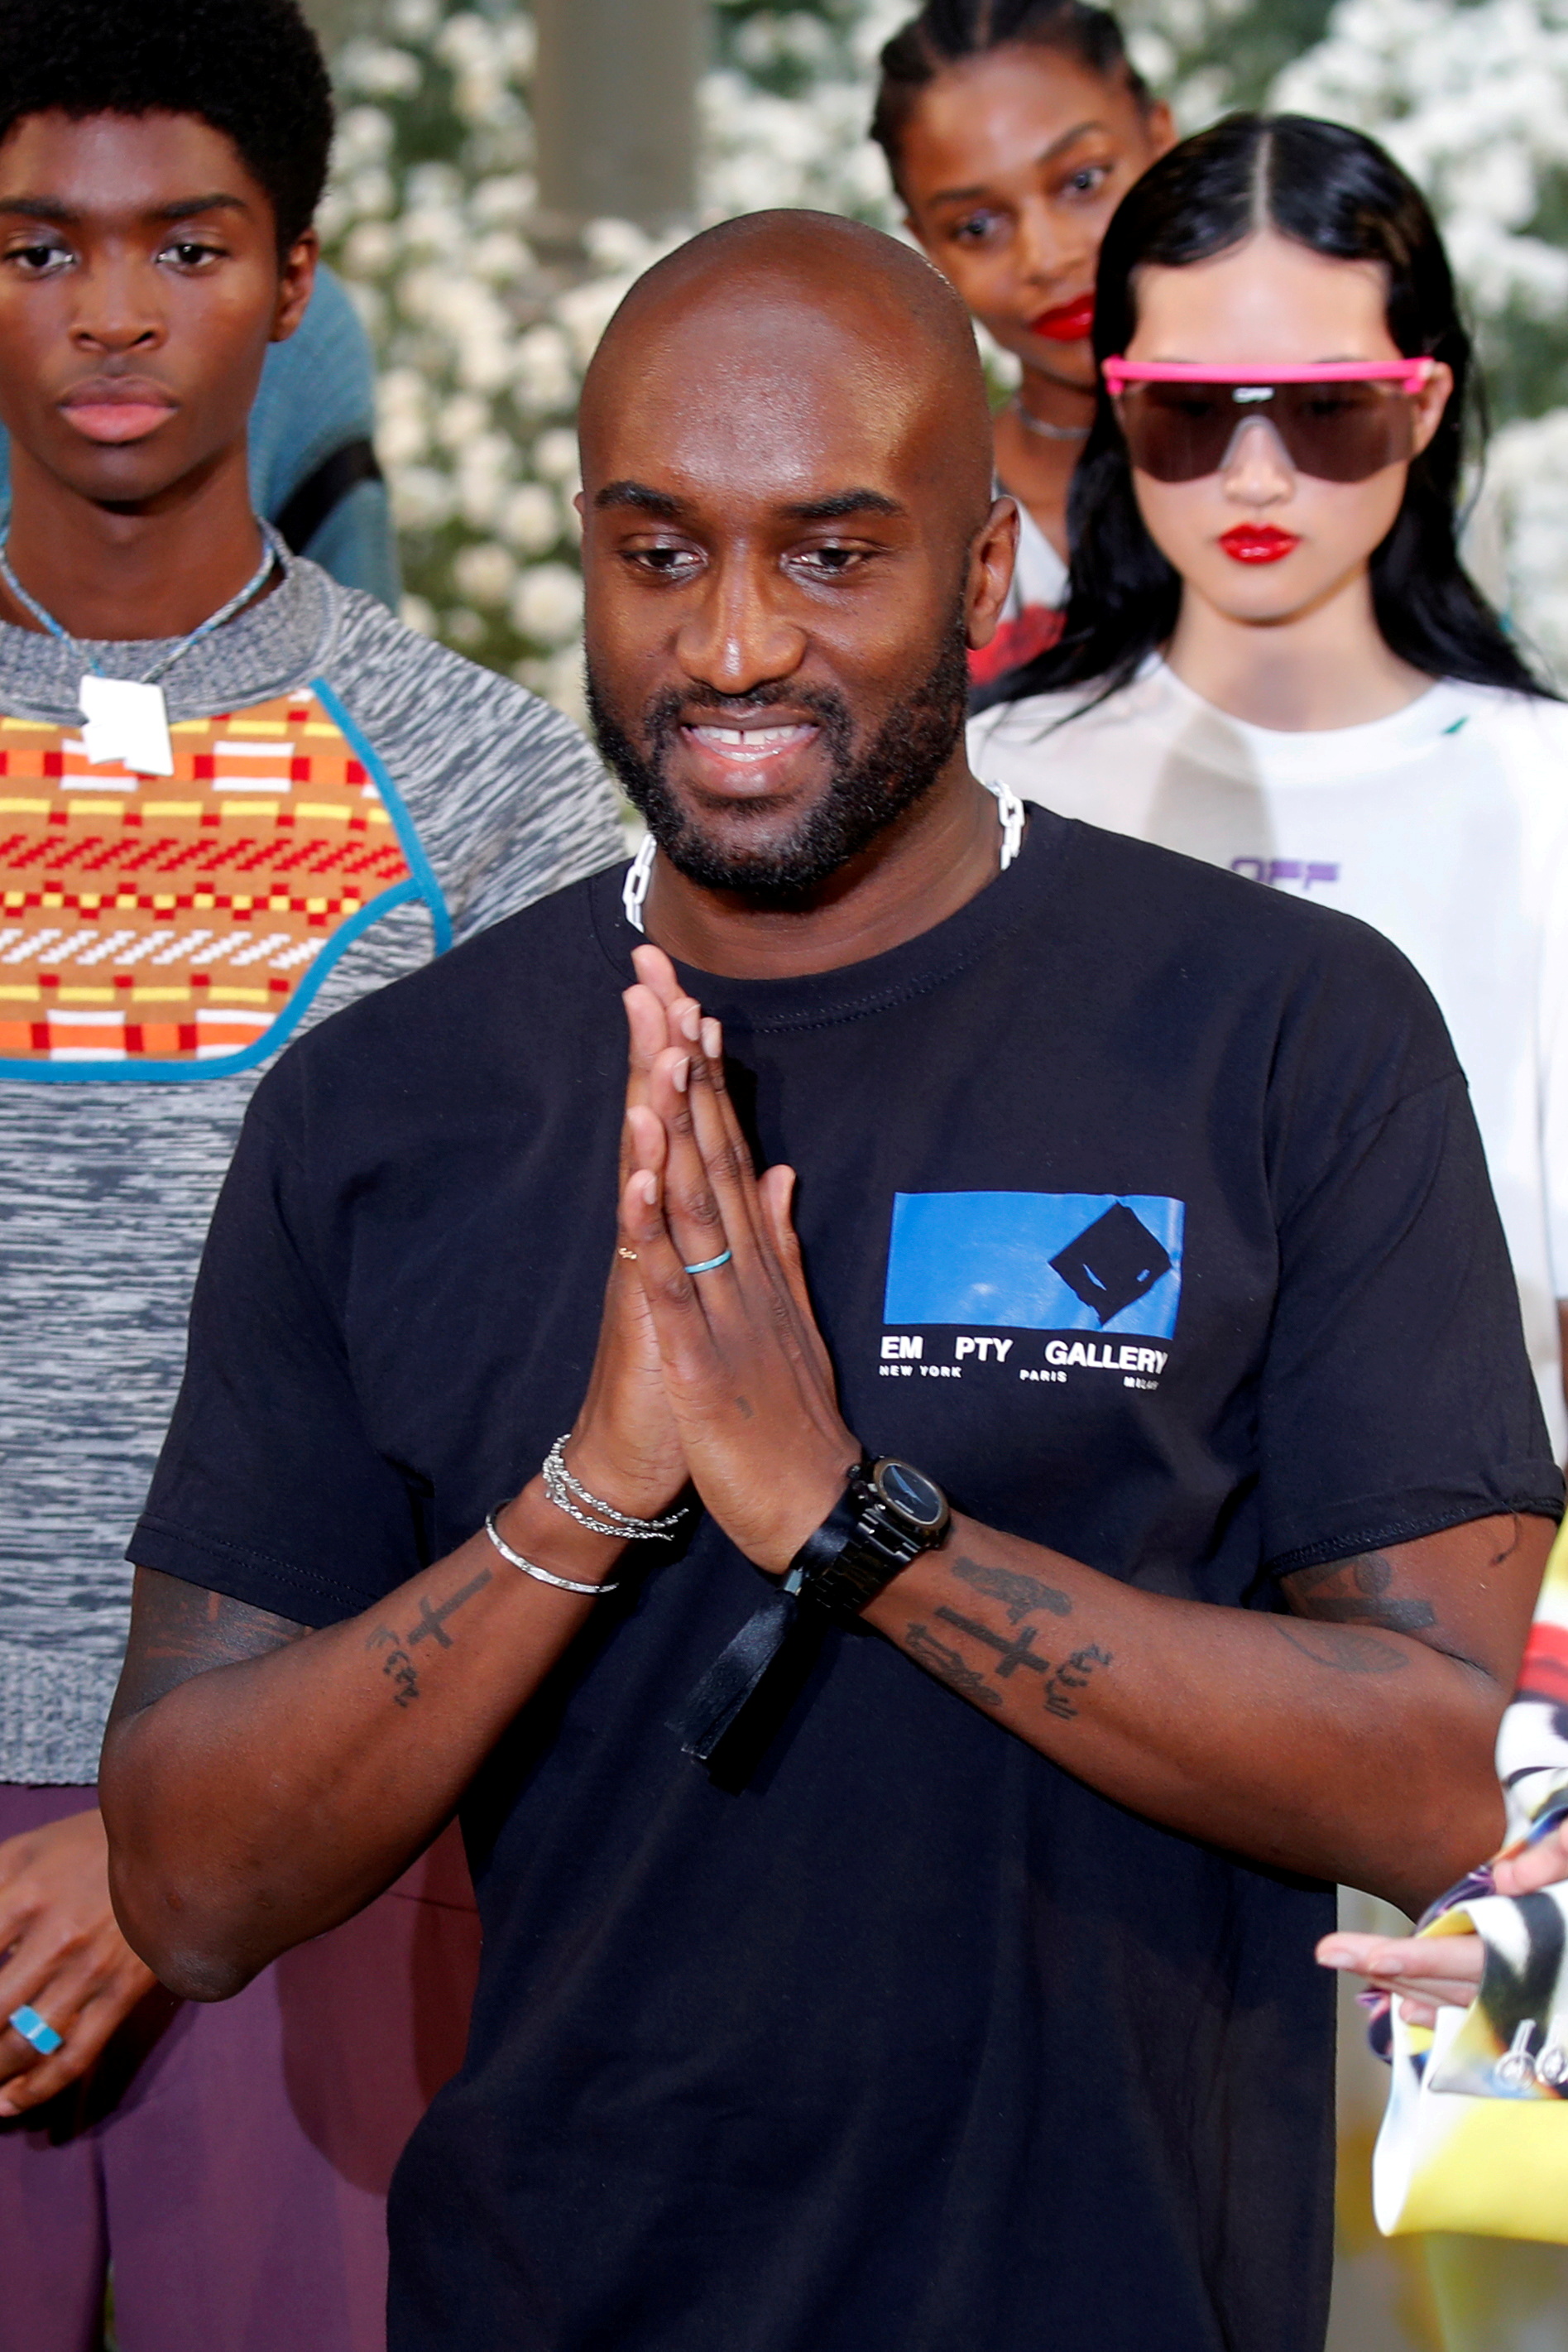 Designer Virgil Abloh appears at the end of his Spring/Summer 2020 collection show for his label Off-White during Men's Fashion Week in Paris, France, June 19, 2019. REUTERS/Charles Platiau